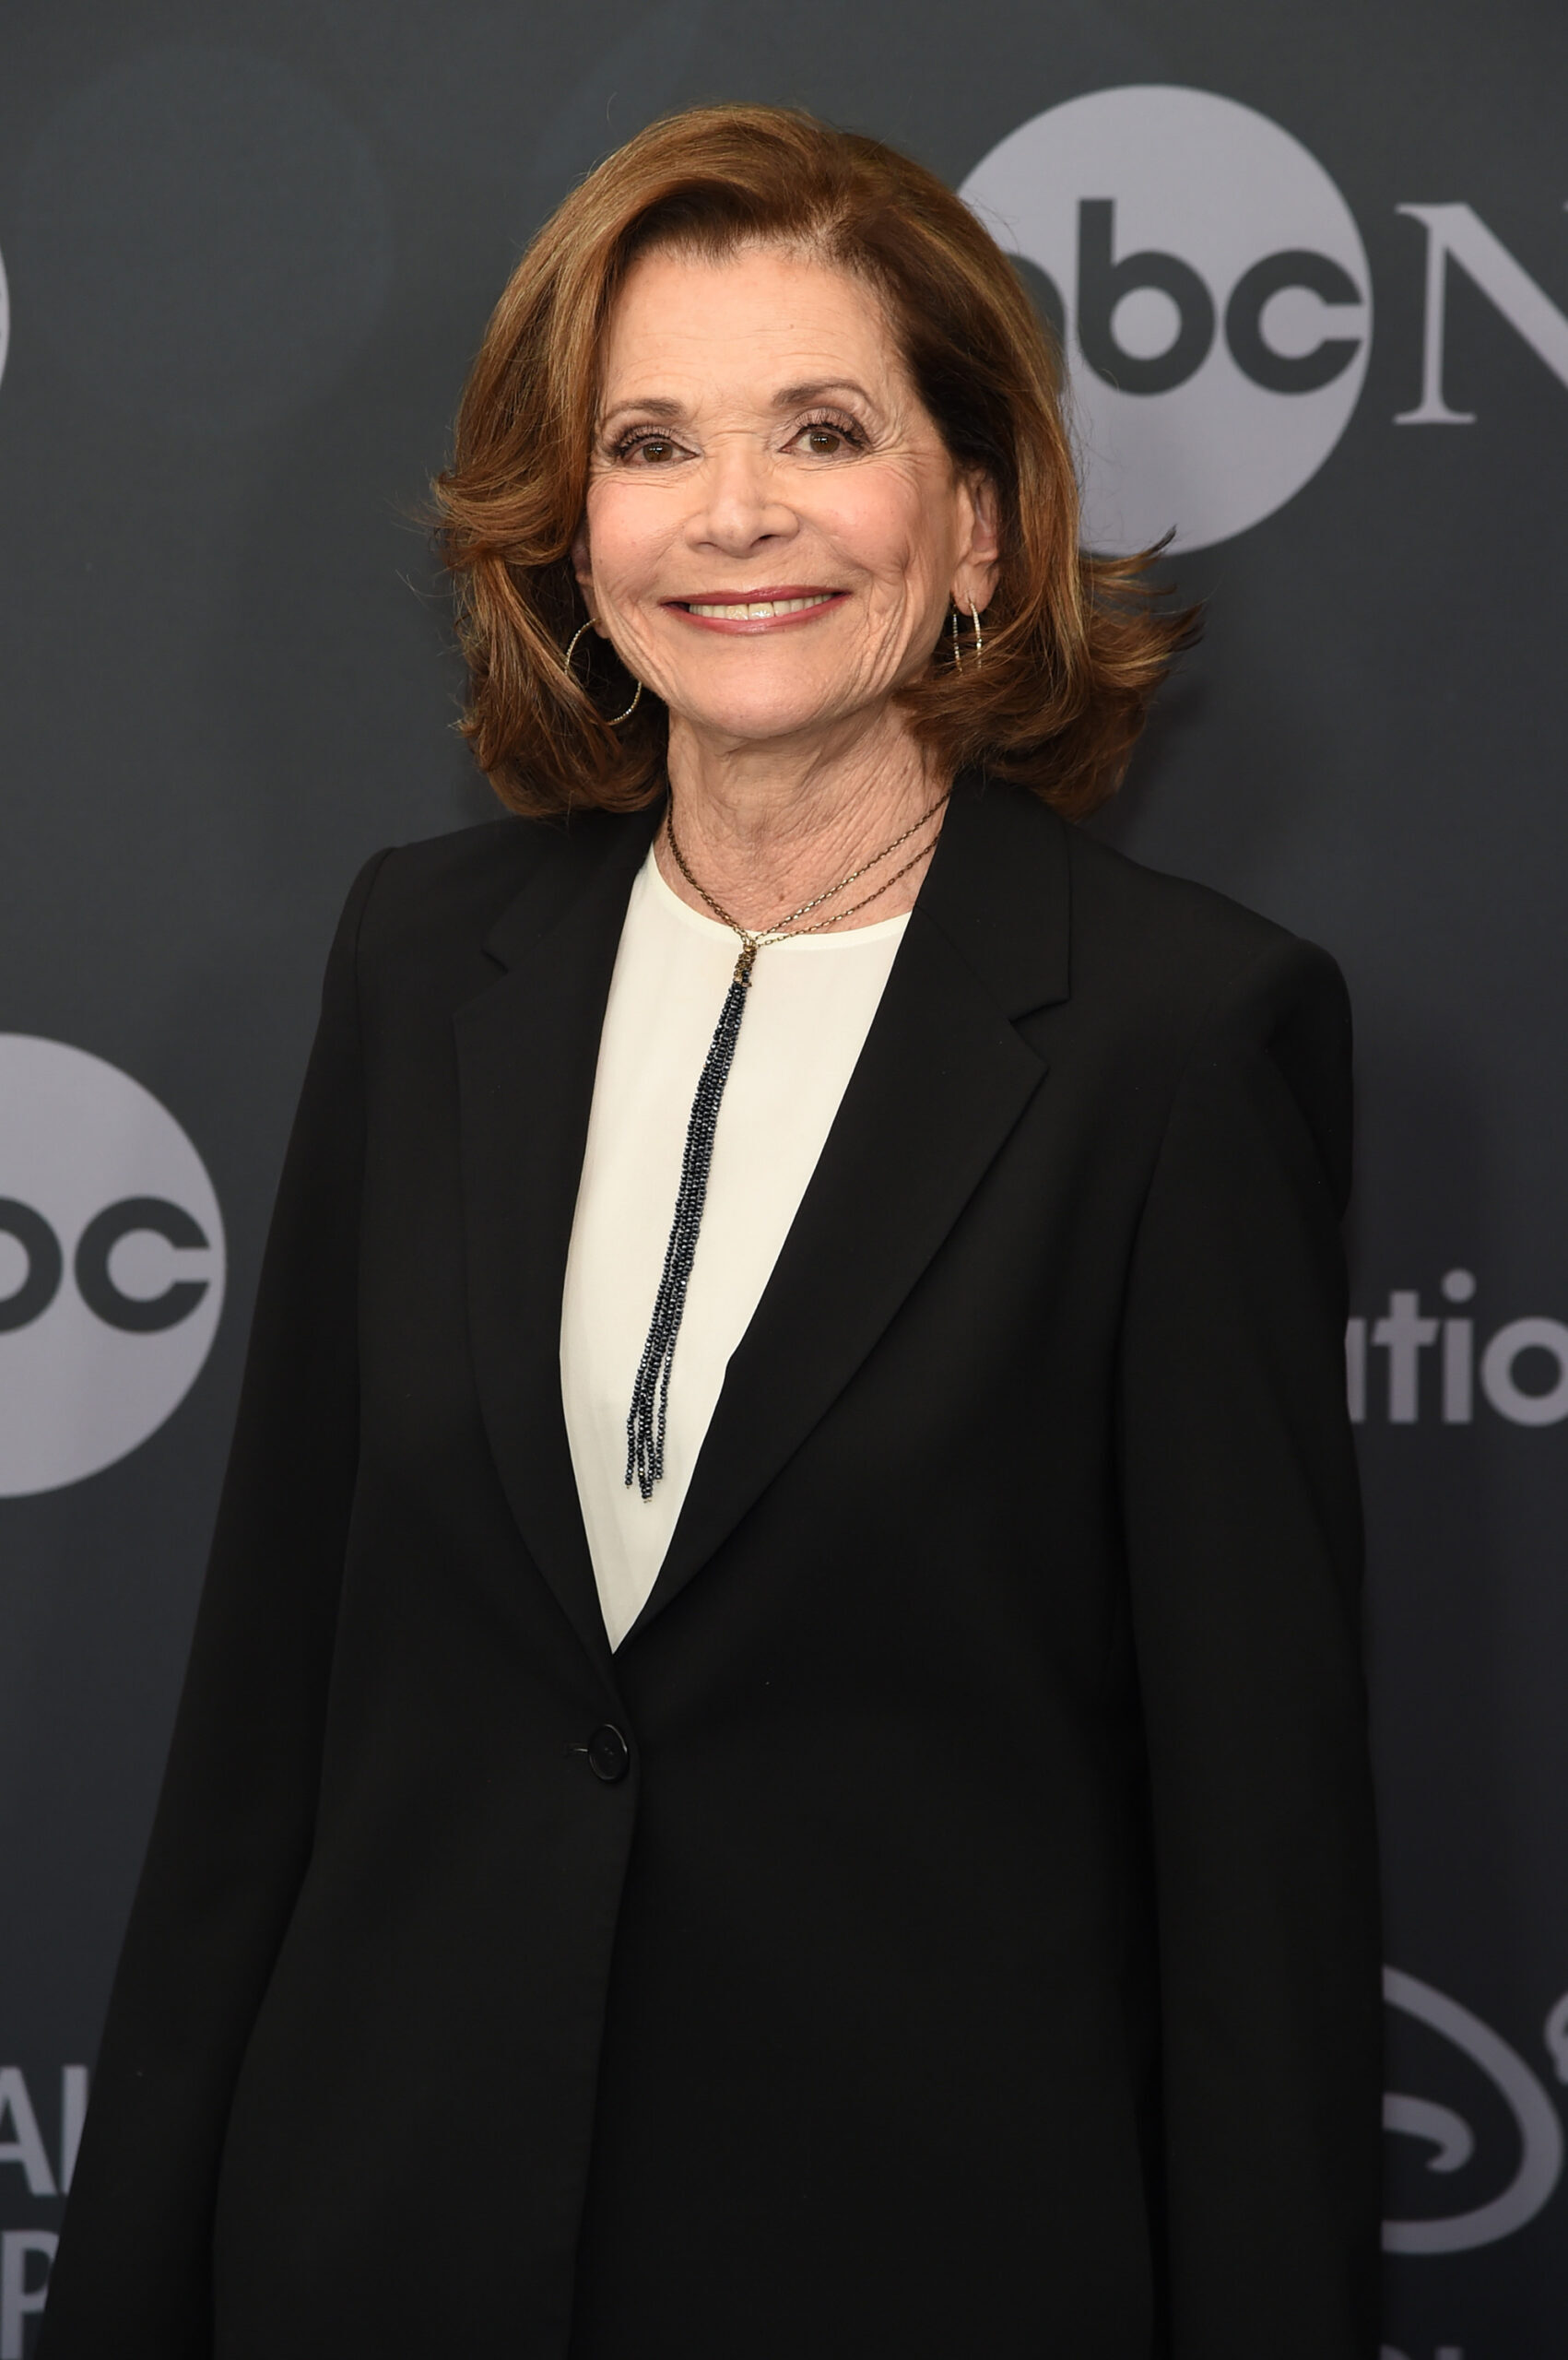 jessica walter in white top and black jacket in front of abc step-and-repeat